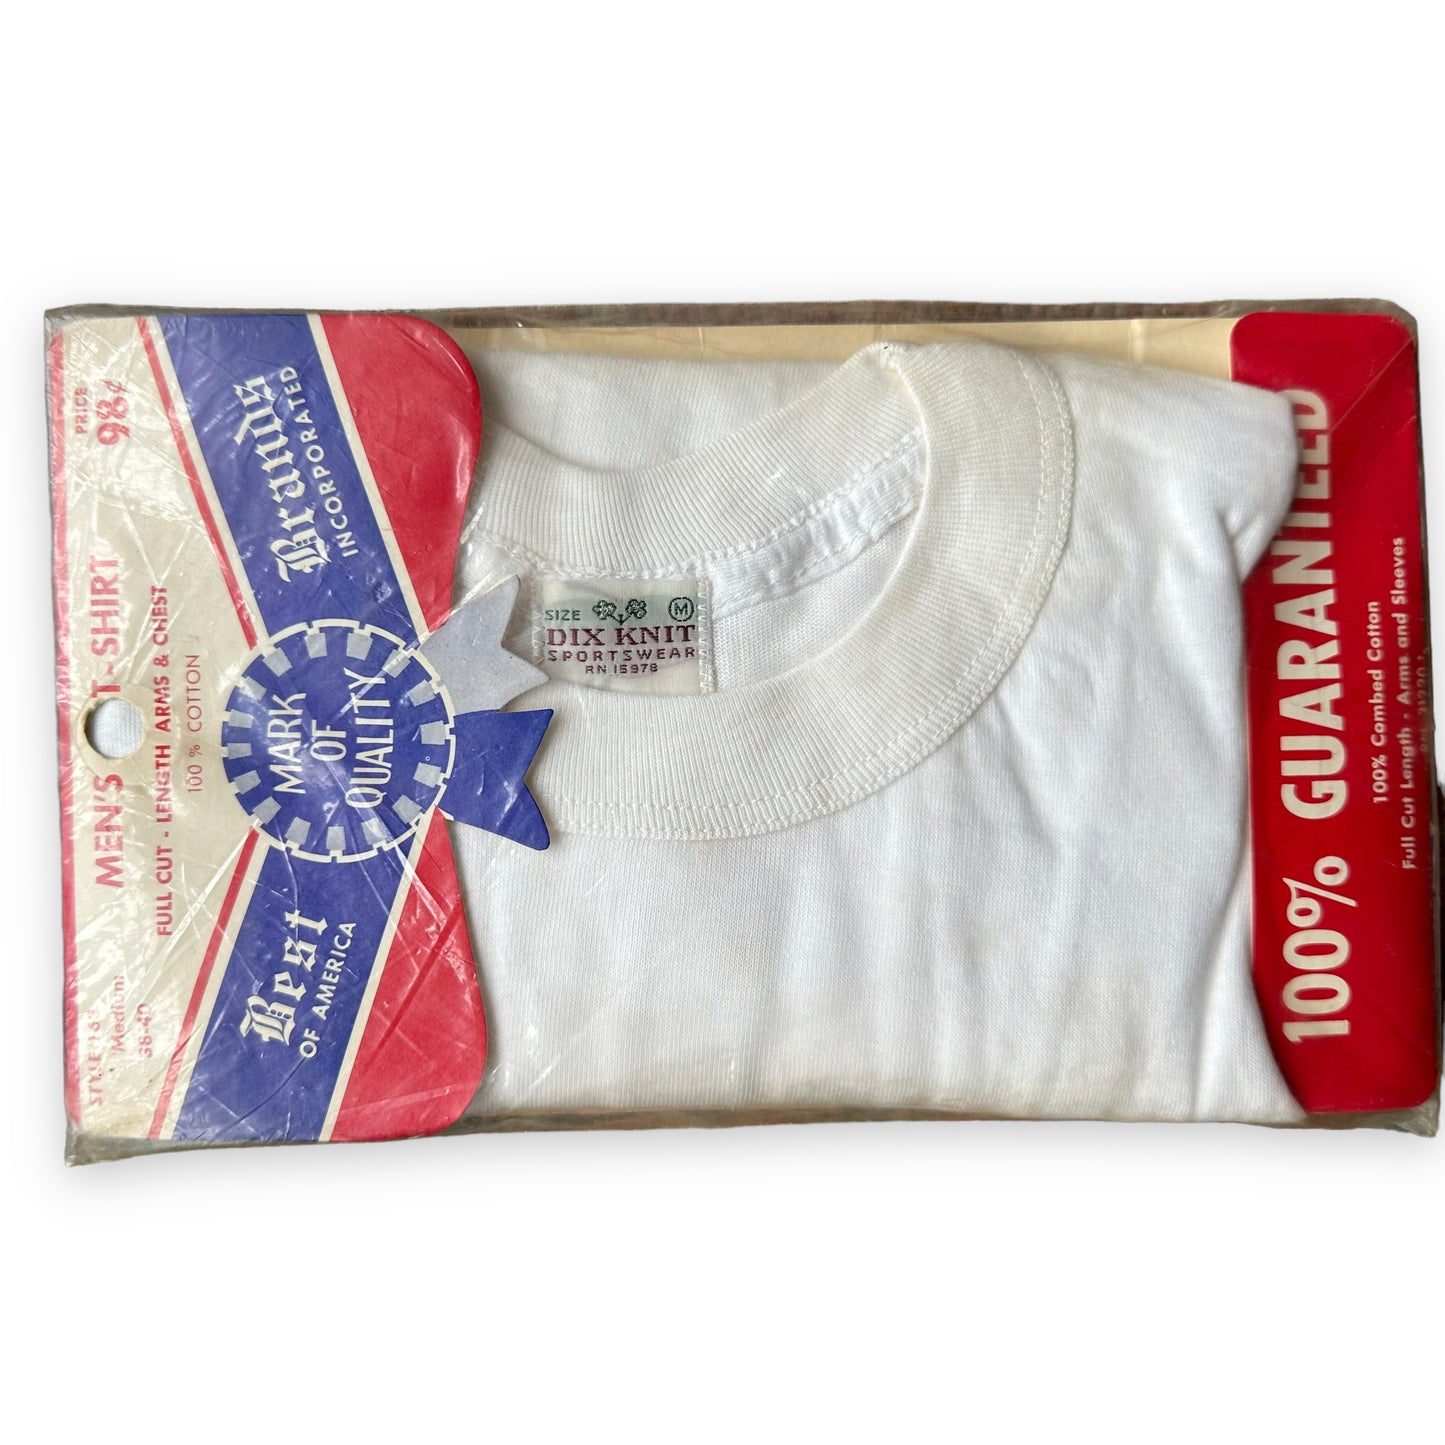 Alternate Front View of Vintage NOS Best Brands Dix Knit Blank T-Shirt SZ M | Vintage Blank Tees Seattle | Vintage T-Shirts Seattle